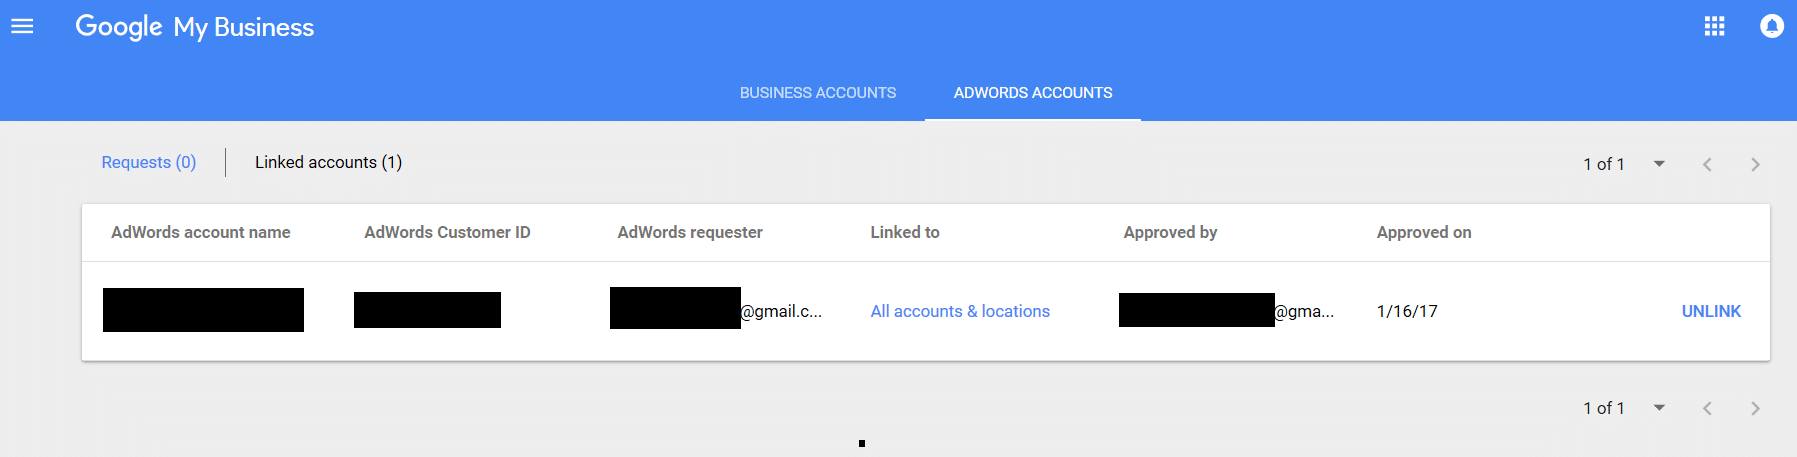 google adwords account linking view